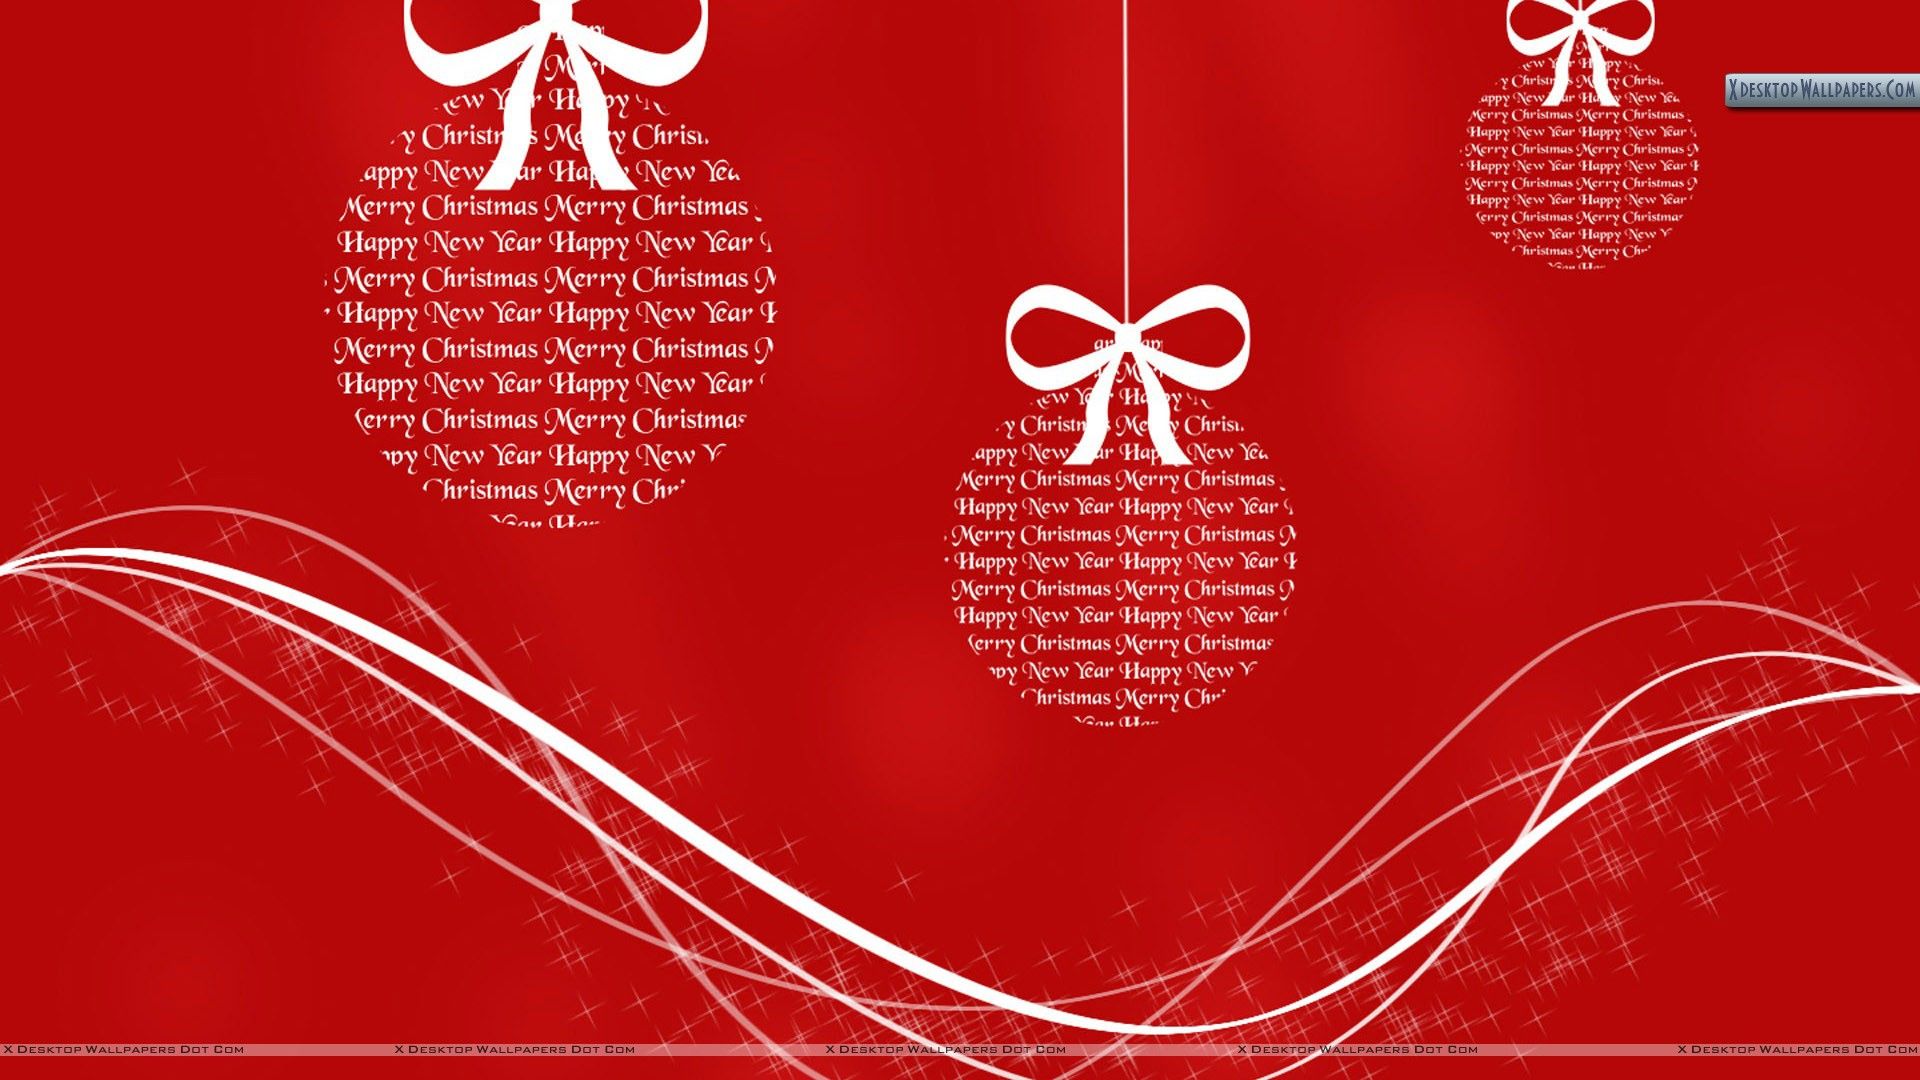 Happy New Year & Merry Christmas Wallpaper